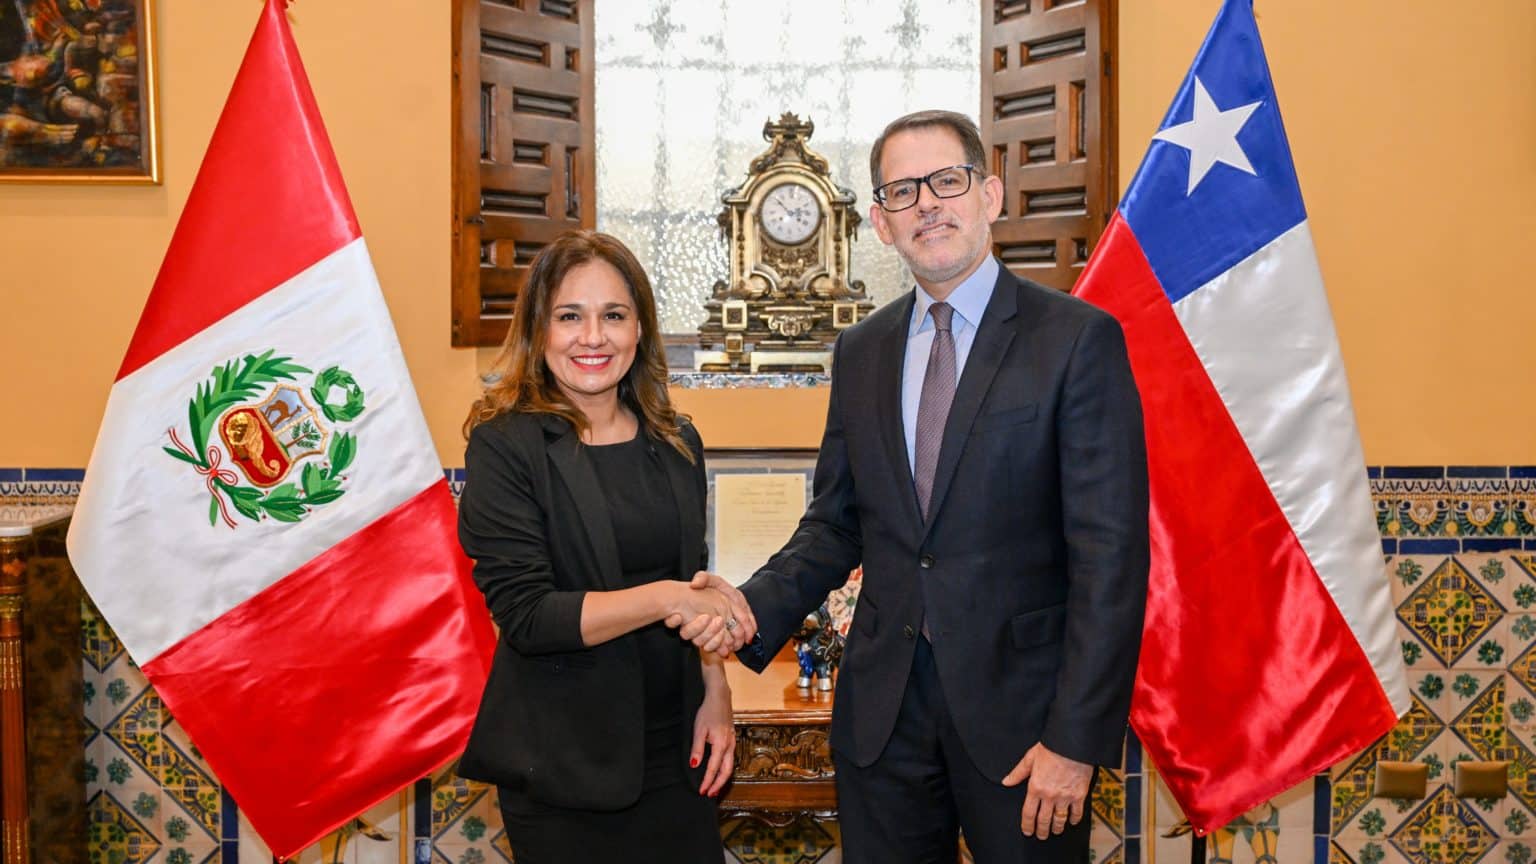 Sub-Secretary of Foreign Ministry Gloria de la Fuente with Vice Foreign Minister Ignacio Higueras of Peru. Photo: Foreign Ministry Chile.